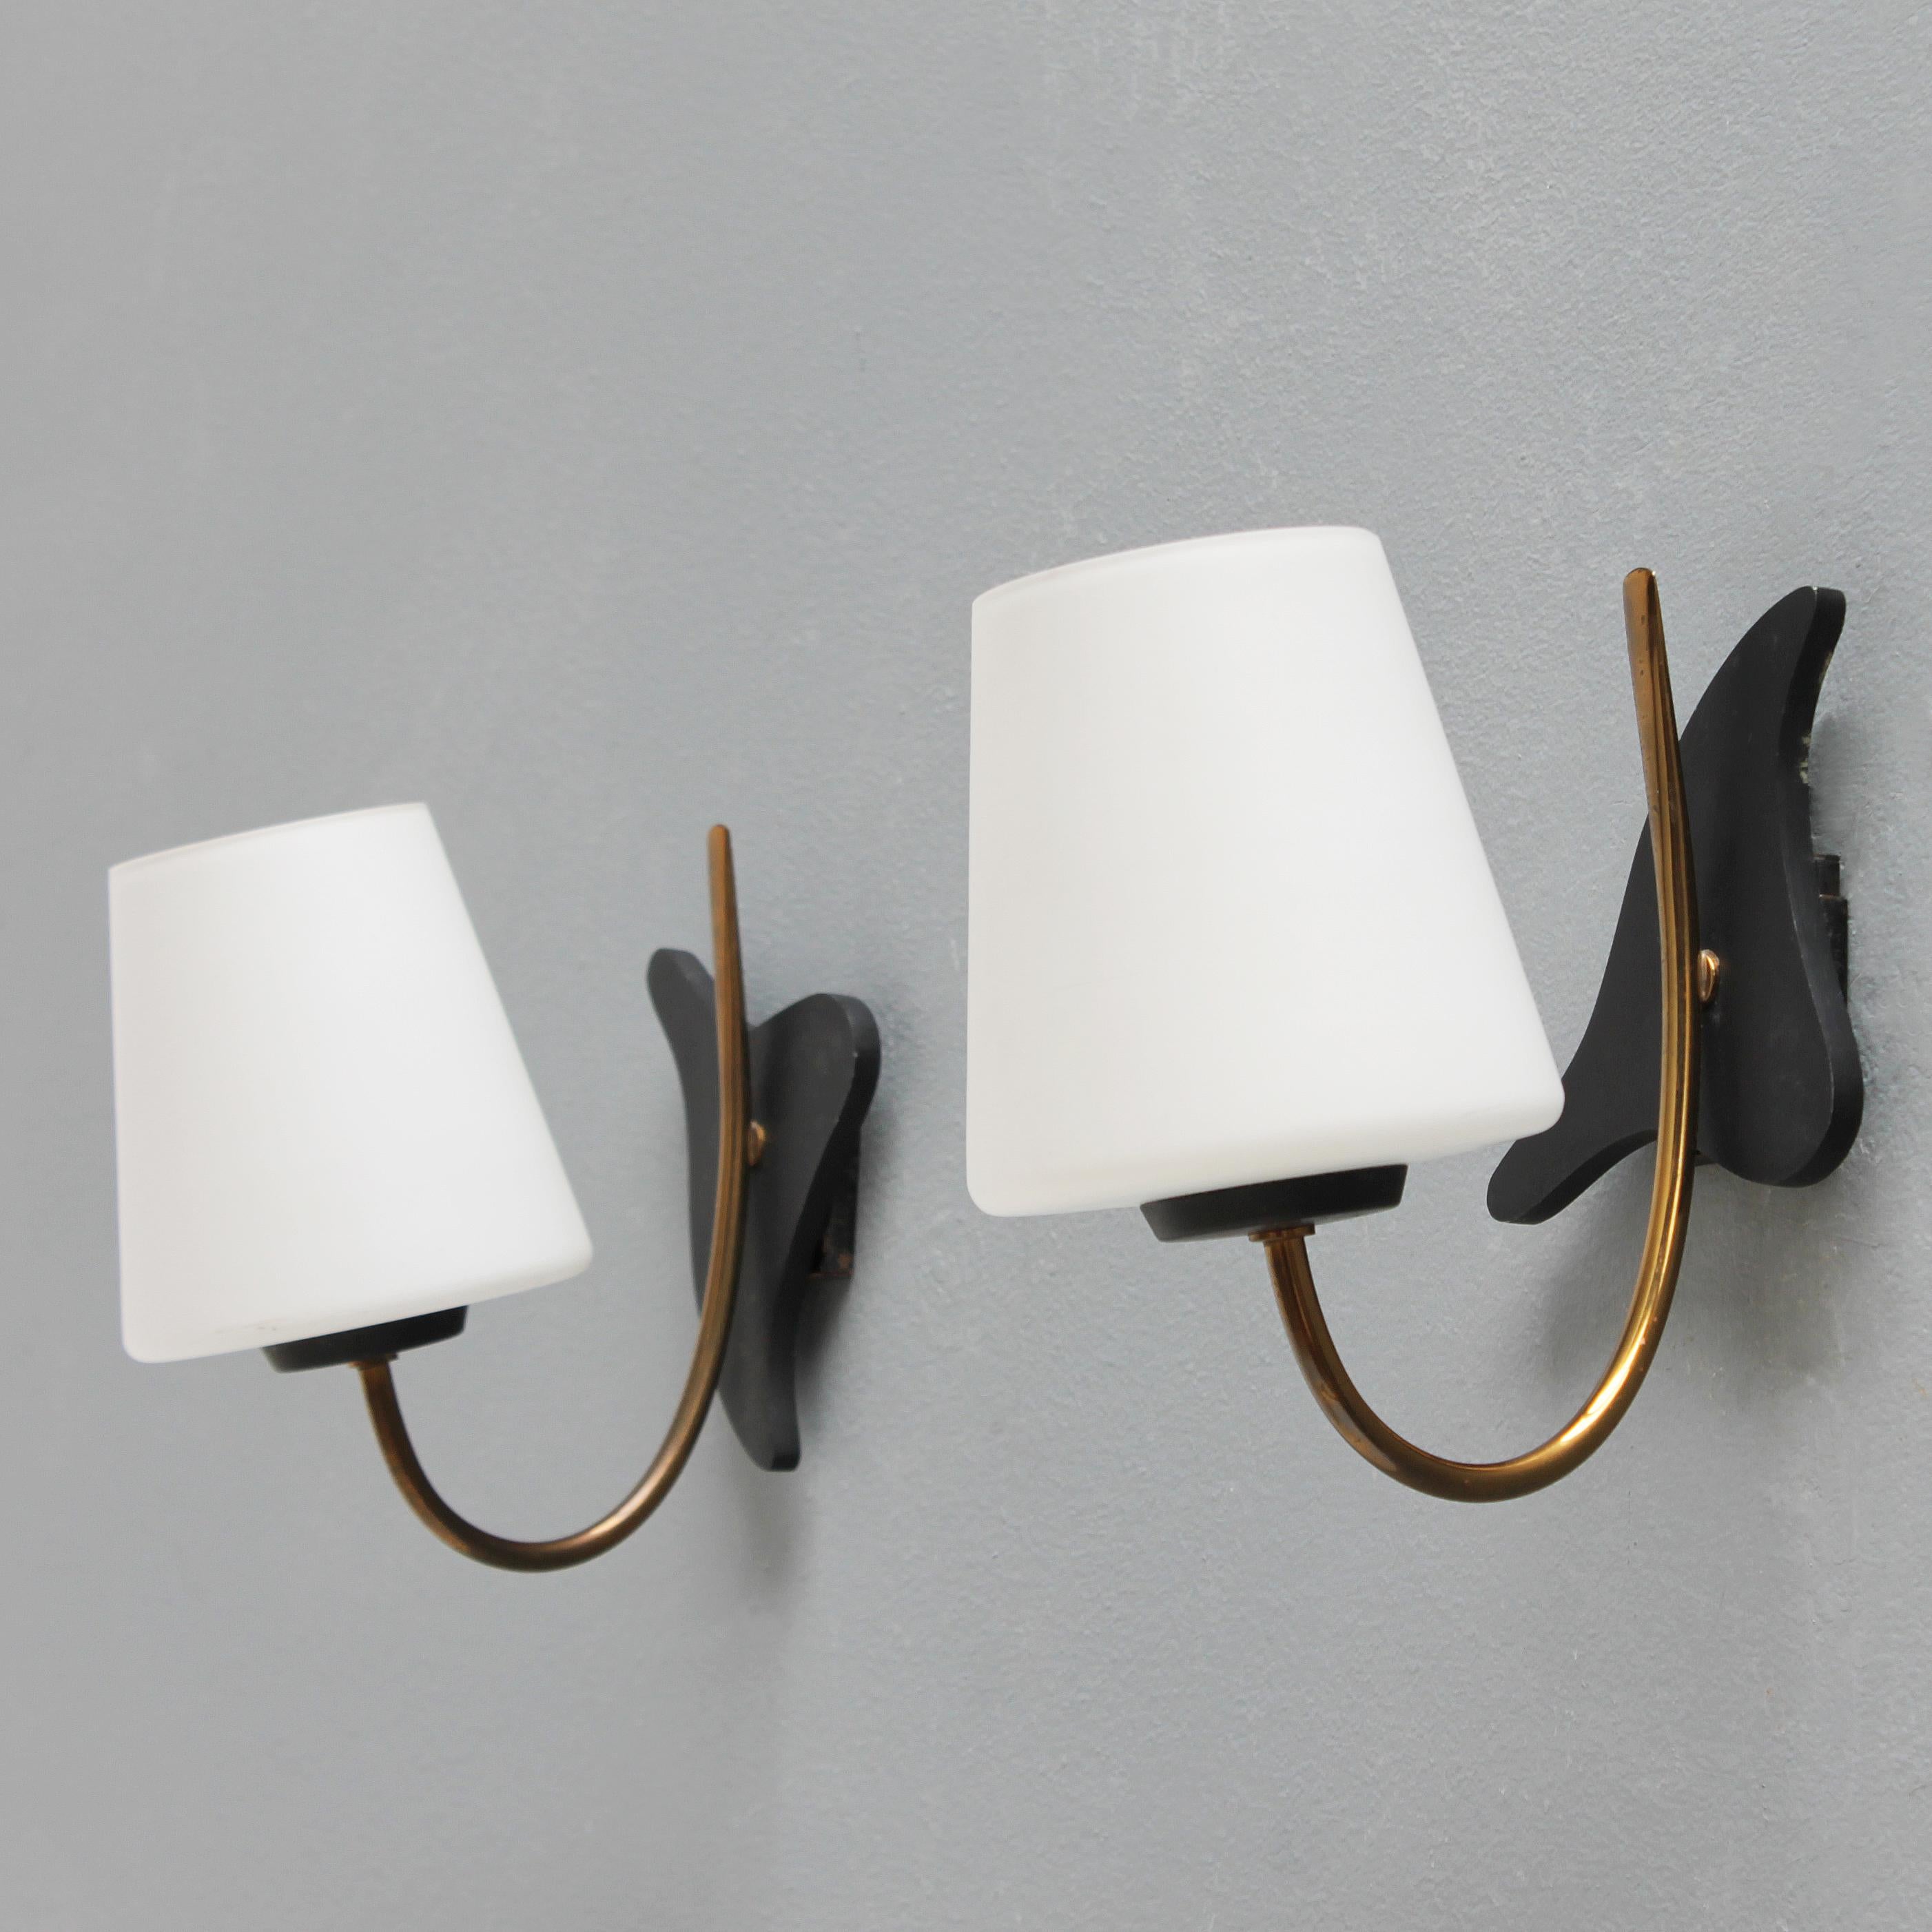 Pair of brass wall lights with white opaline glass and matt black wall plates. French by Maison Lunel from the 1950s. Beautiful condition.
The biomorphe black wall plates can be rotated in any position: symmetrical or vice versa.
Each light has a